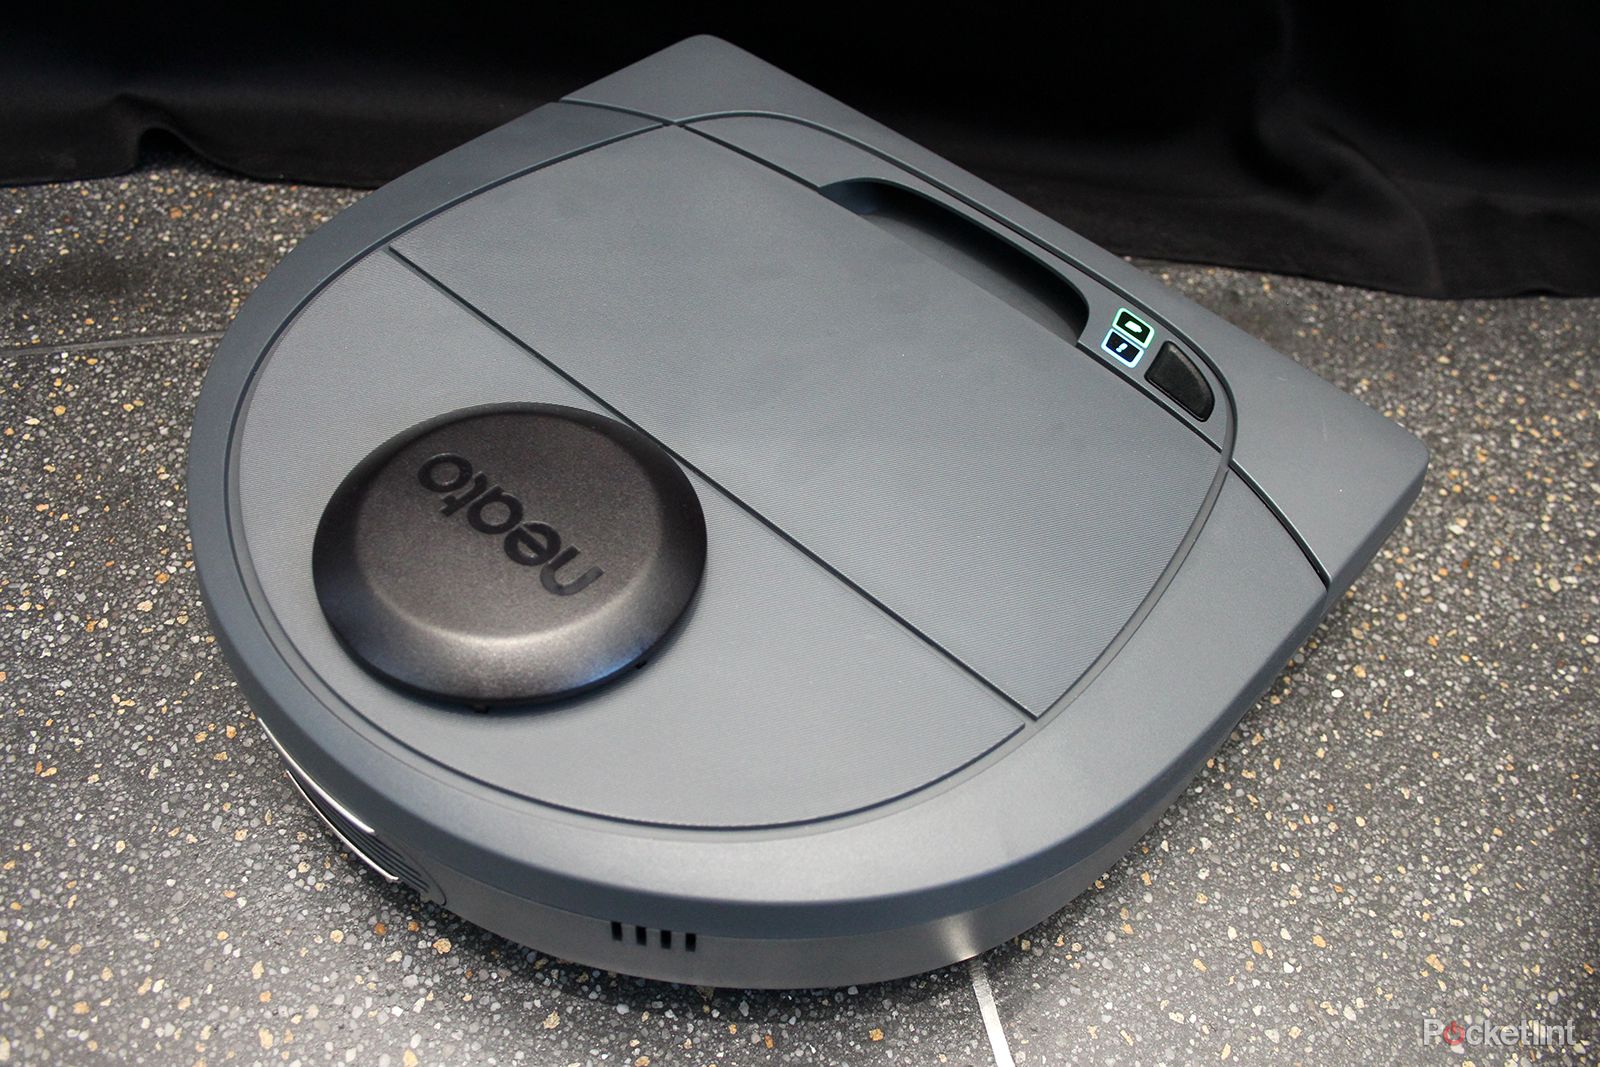 neato launches botvac d3 and d5 connected robot vacuum cleaners starting at 399 image 1